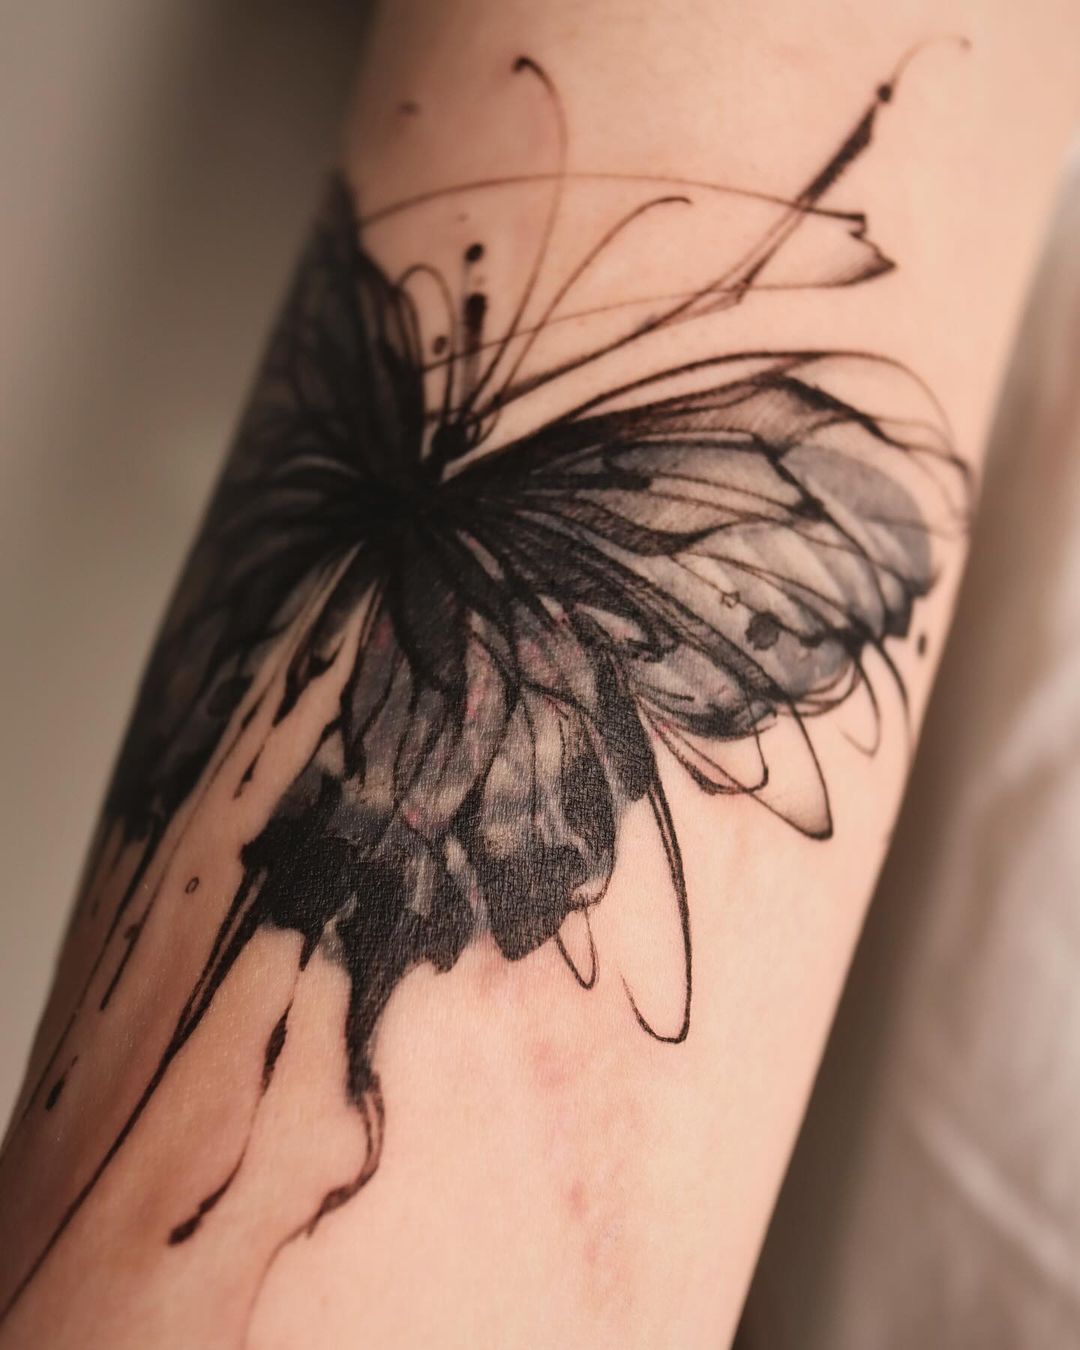 REalistic butterfly tattoo by tattoo chamsae